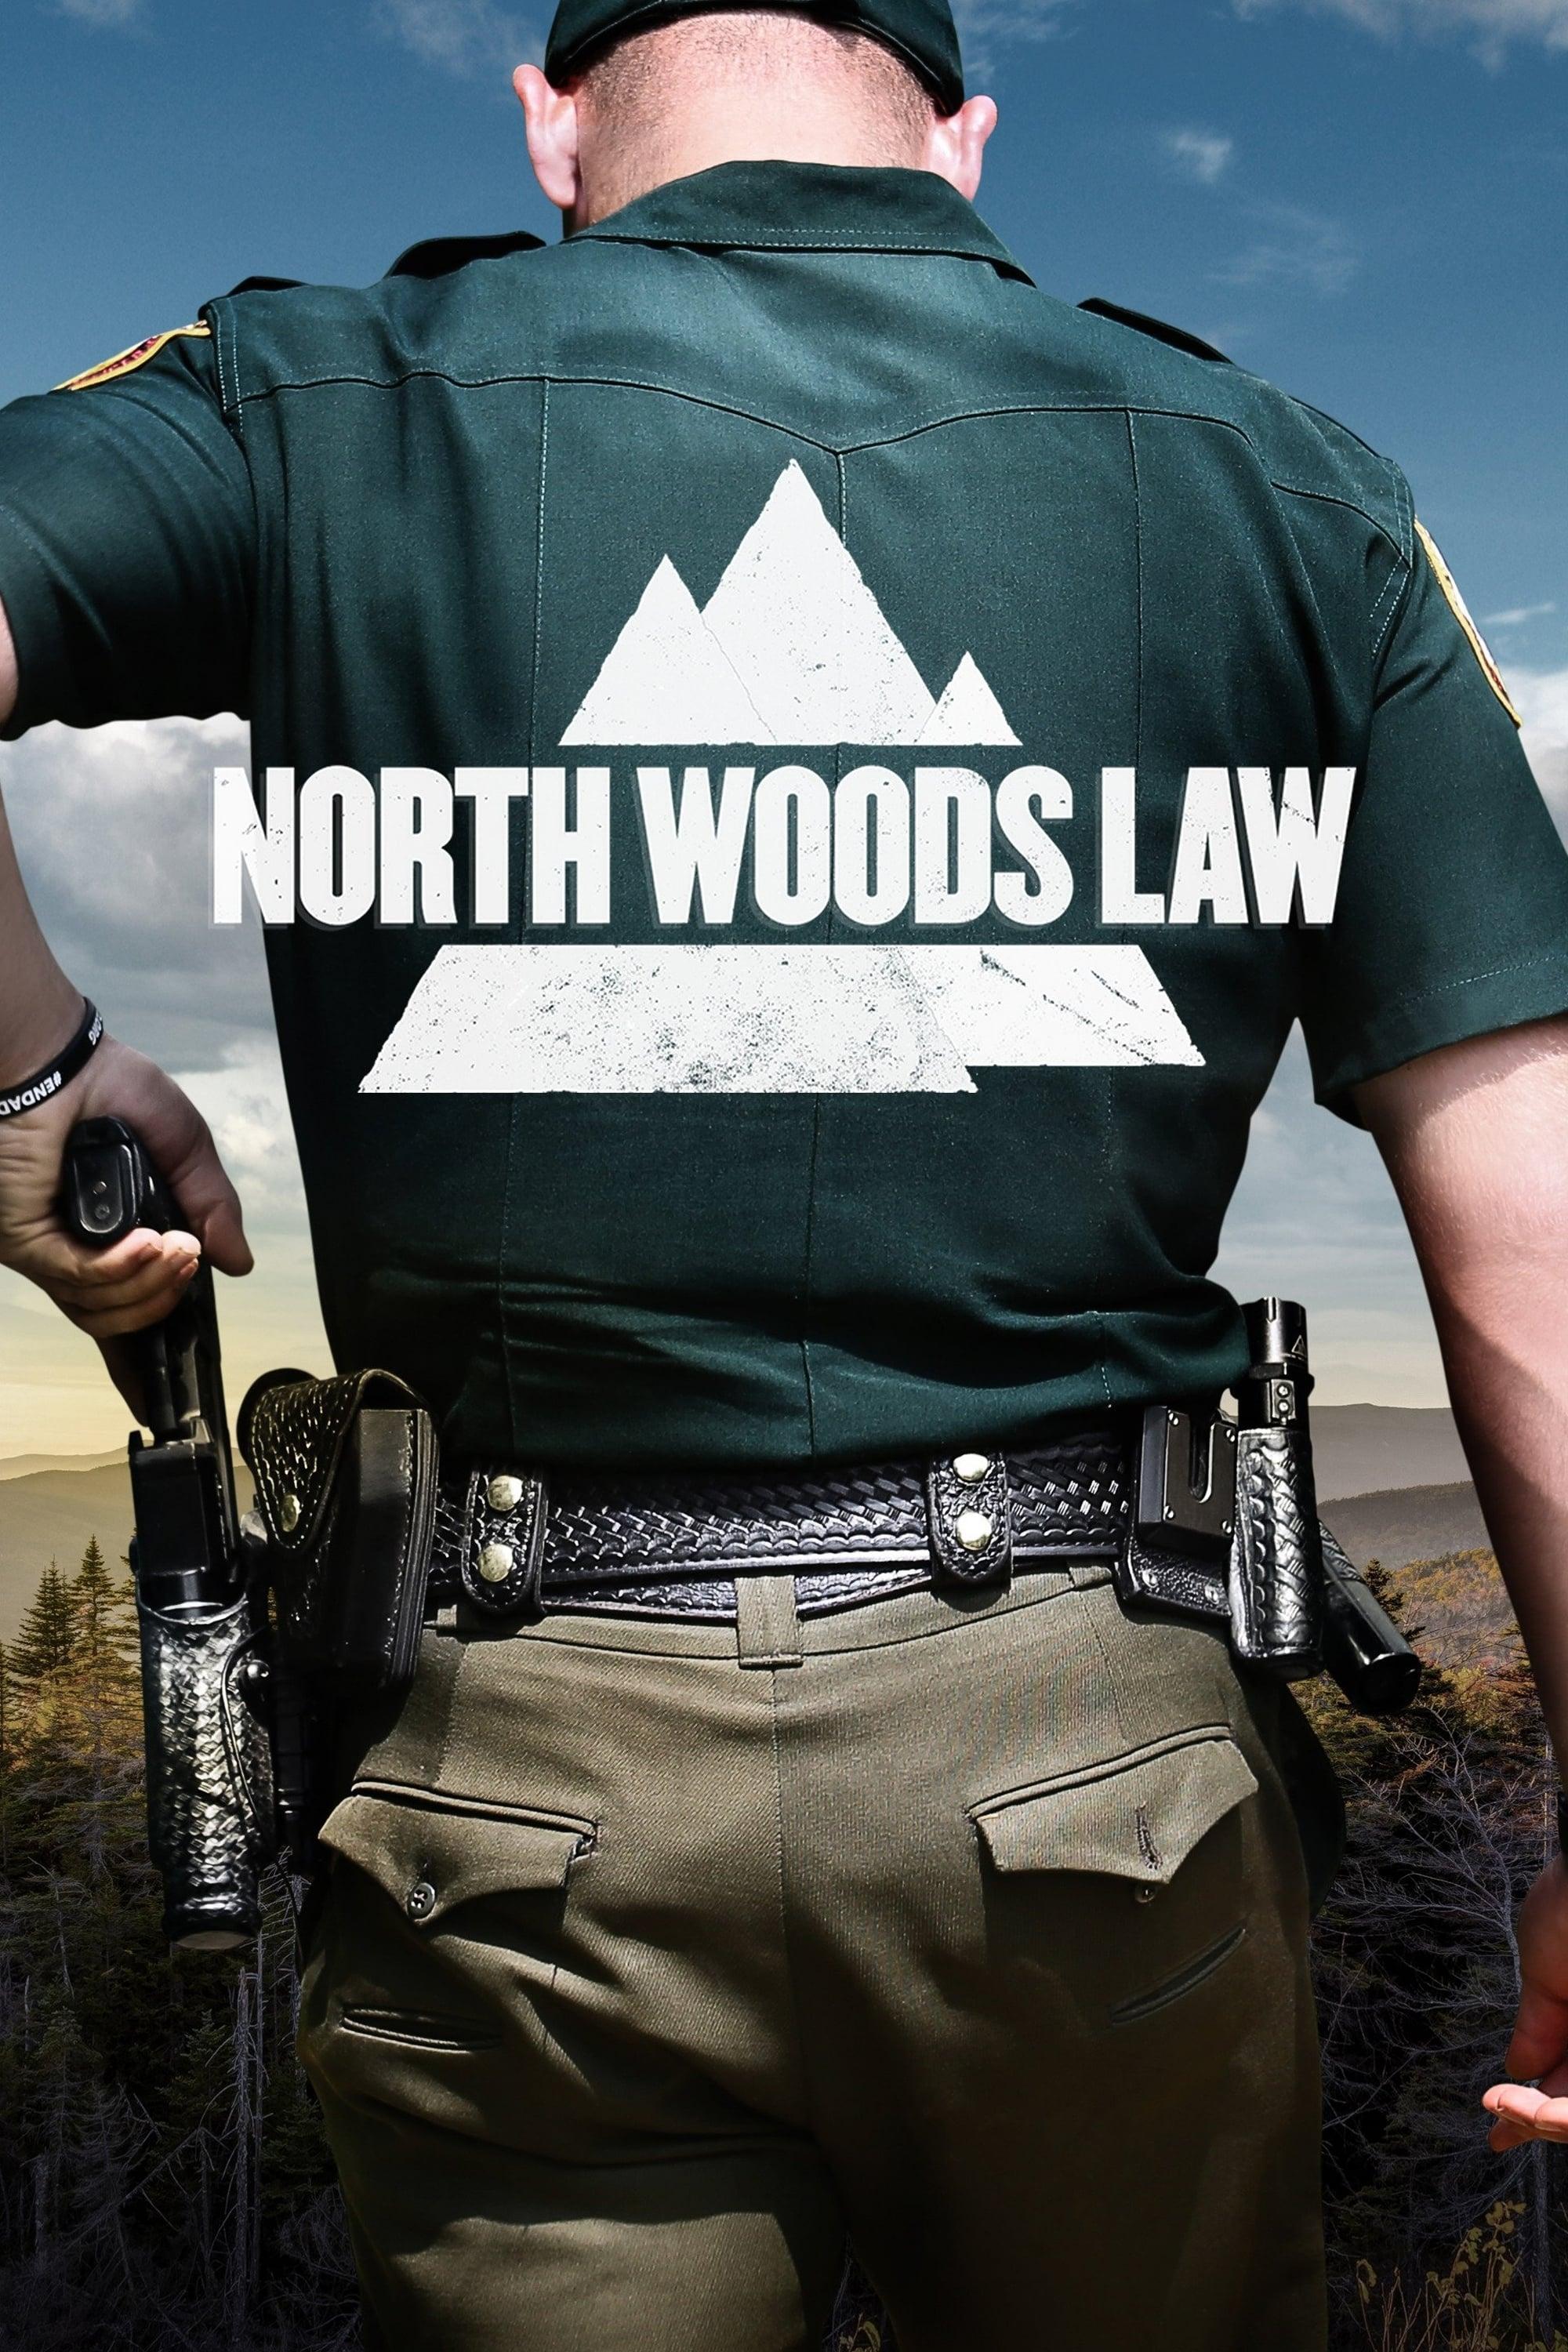 North Woods Law poster